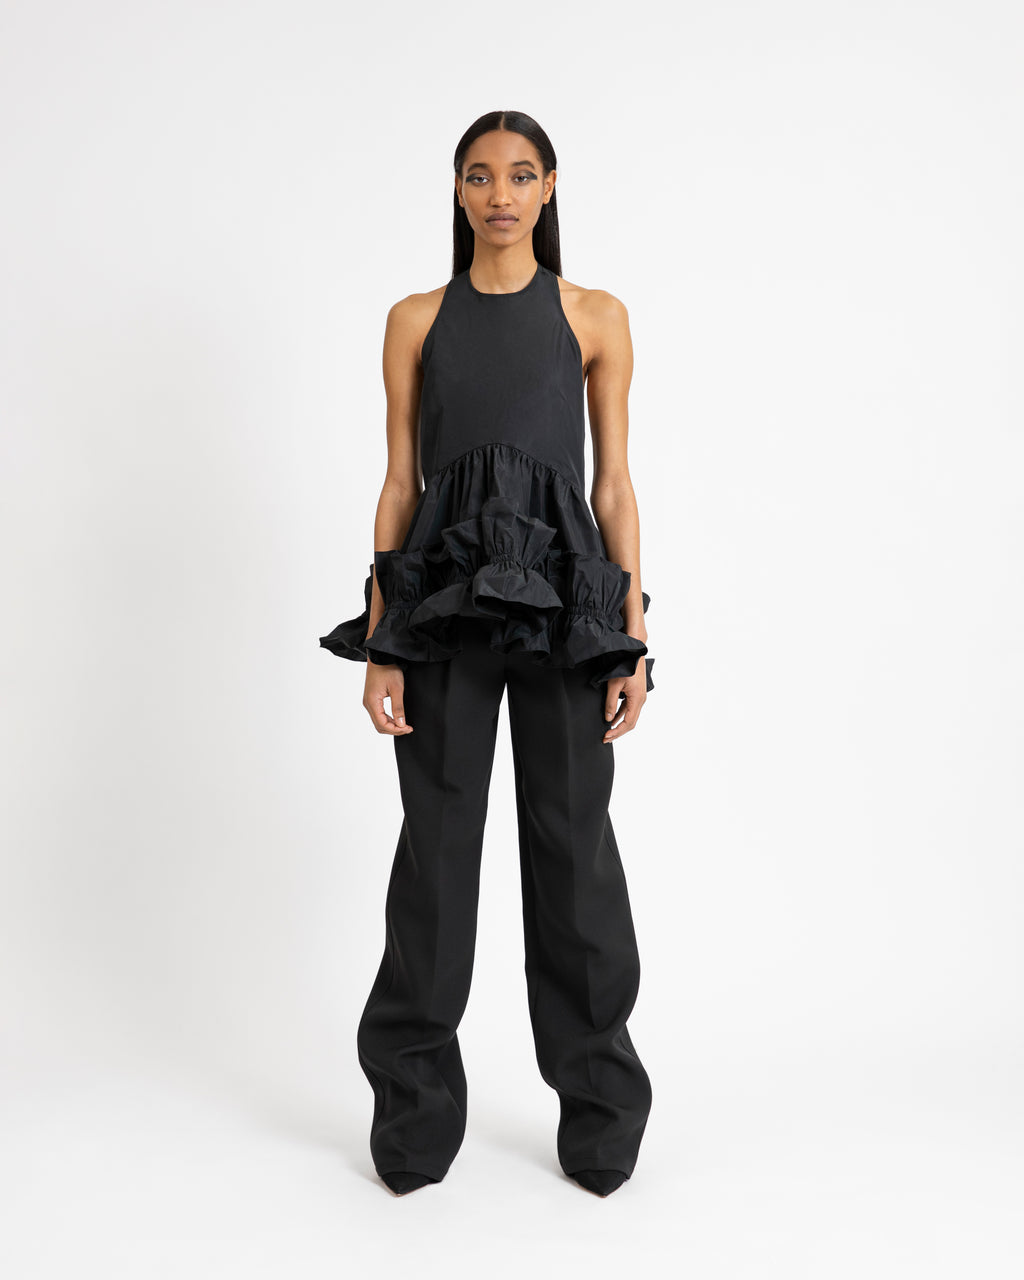 O'CONNOR WIDE-LEG TAILORED PANTS